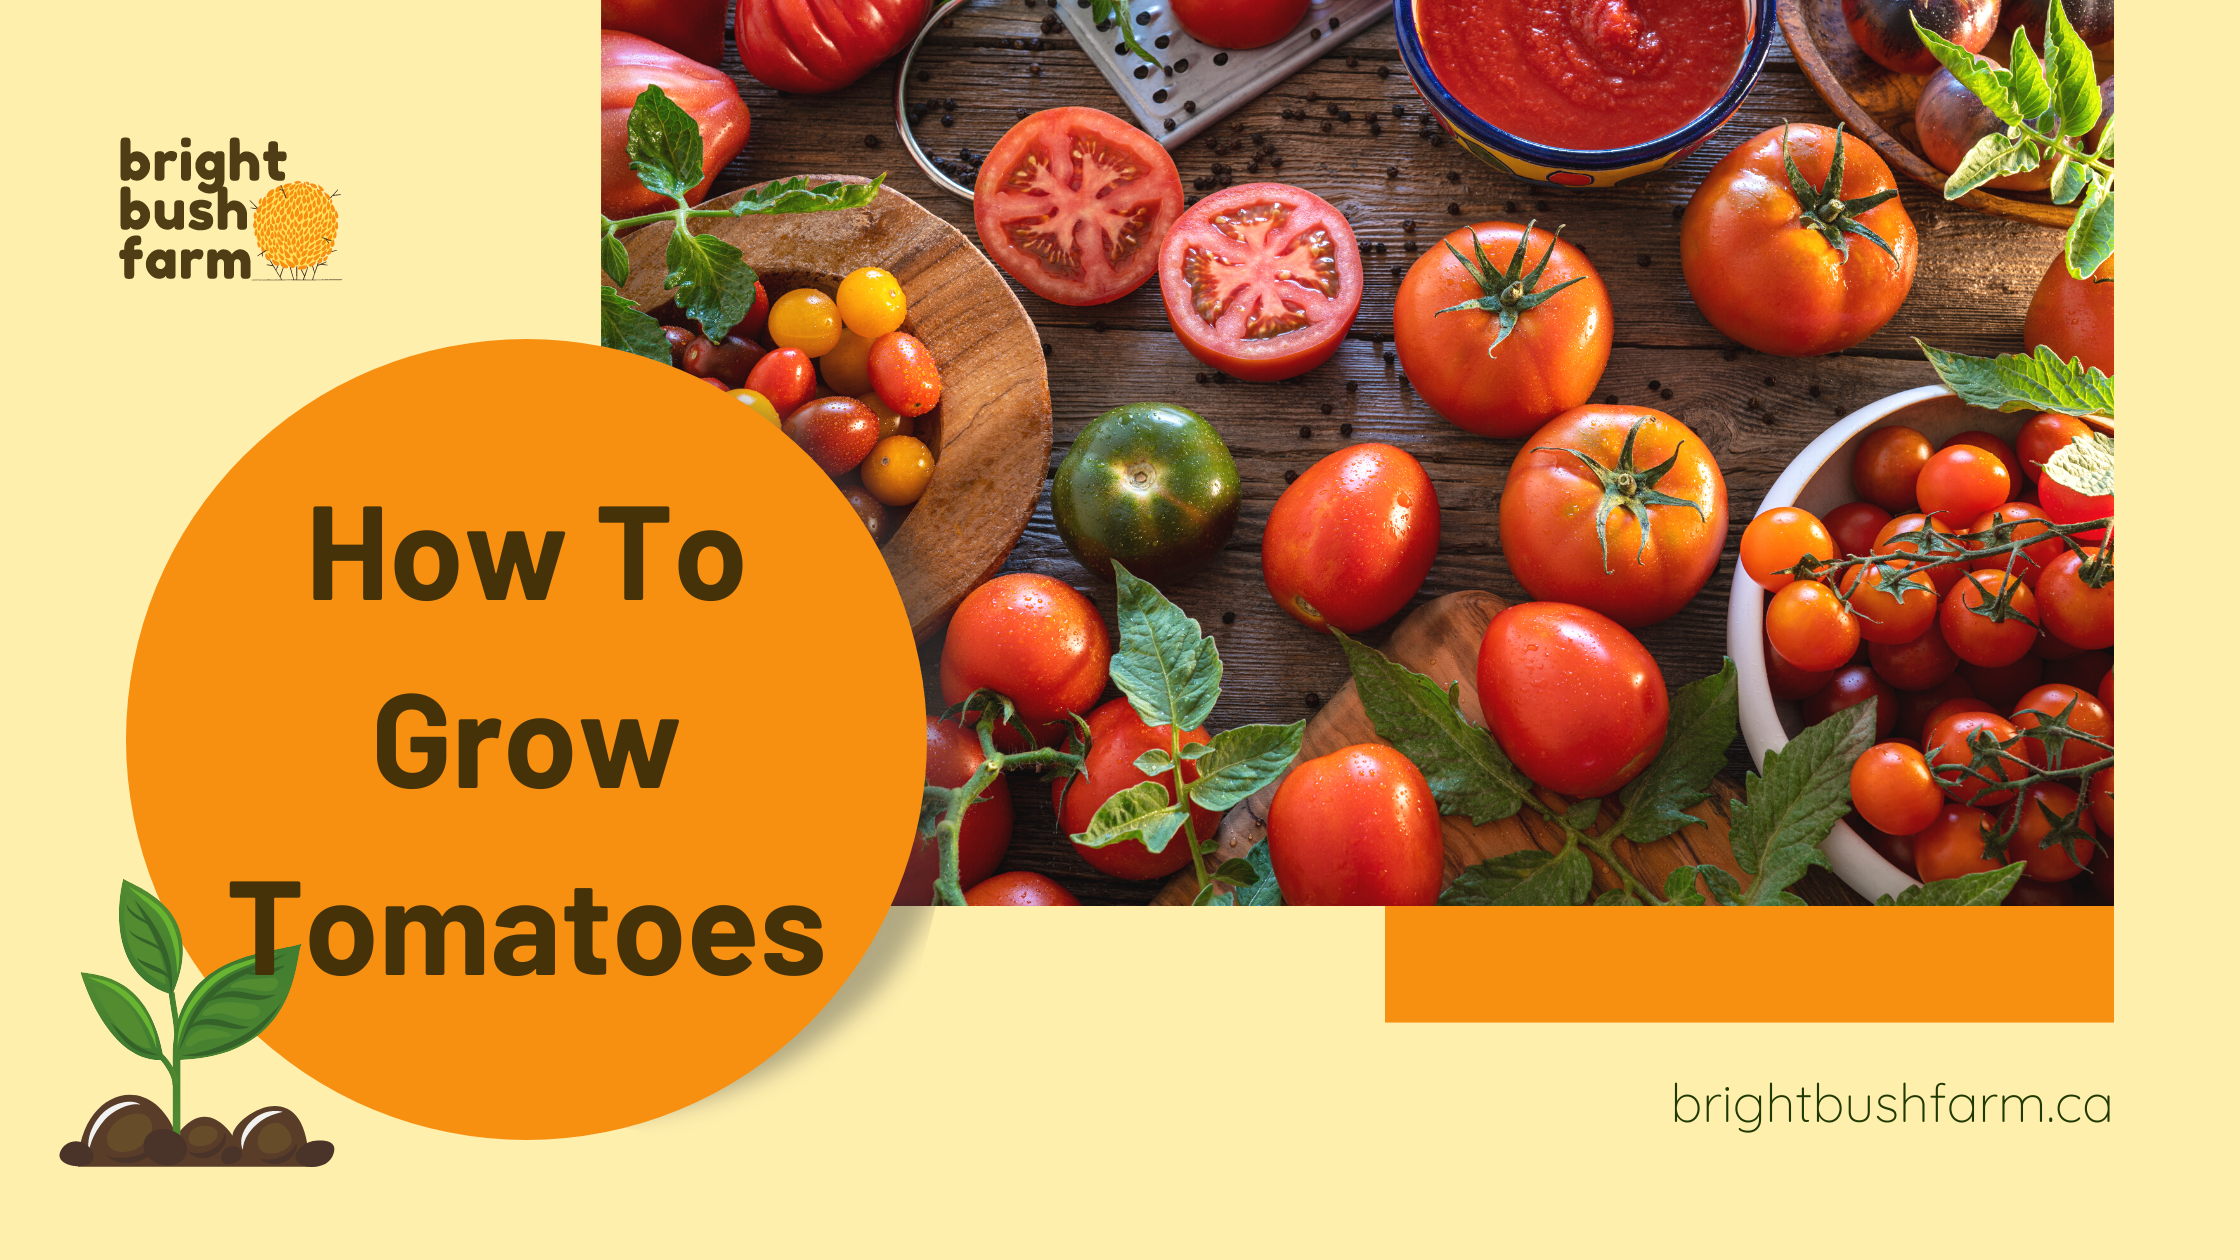 Germination Time for Tomatoes - A Guide to Temperature, Moisture and Materials